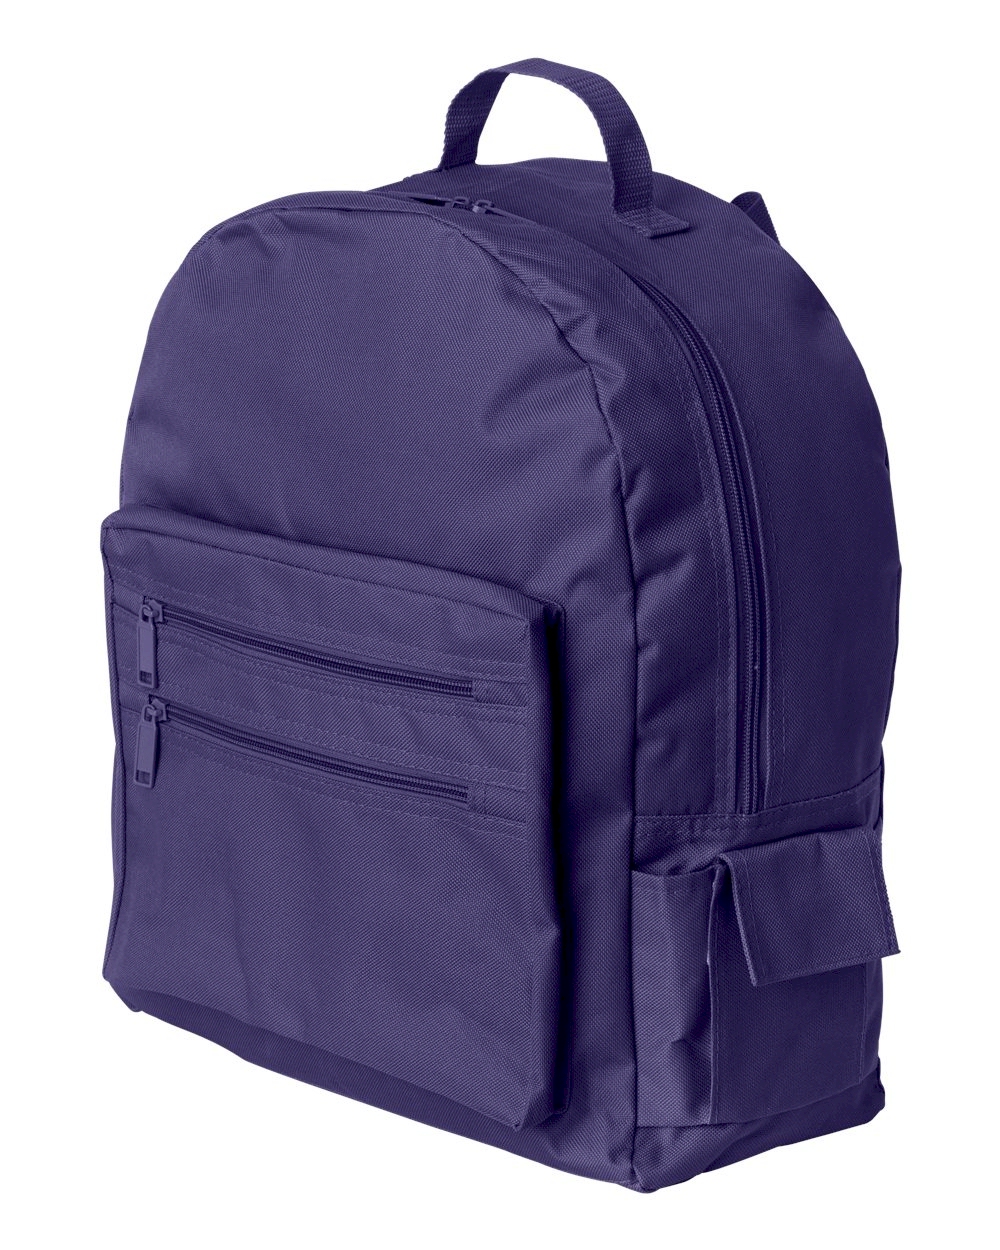 Eco-Friendly 16" Backpack Embroidery Blanks - PURPLE